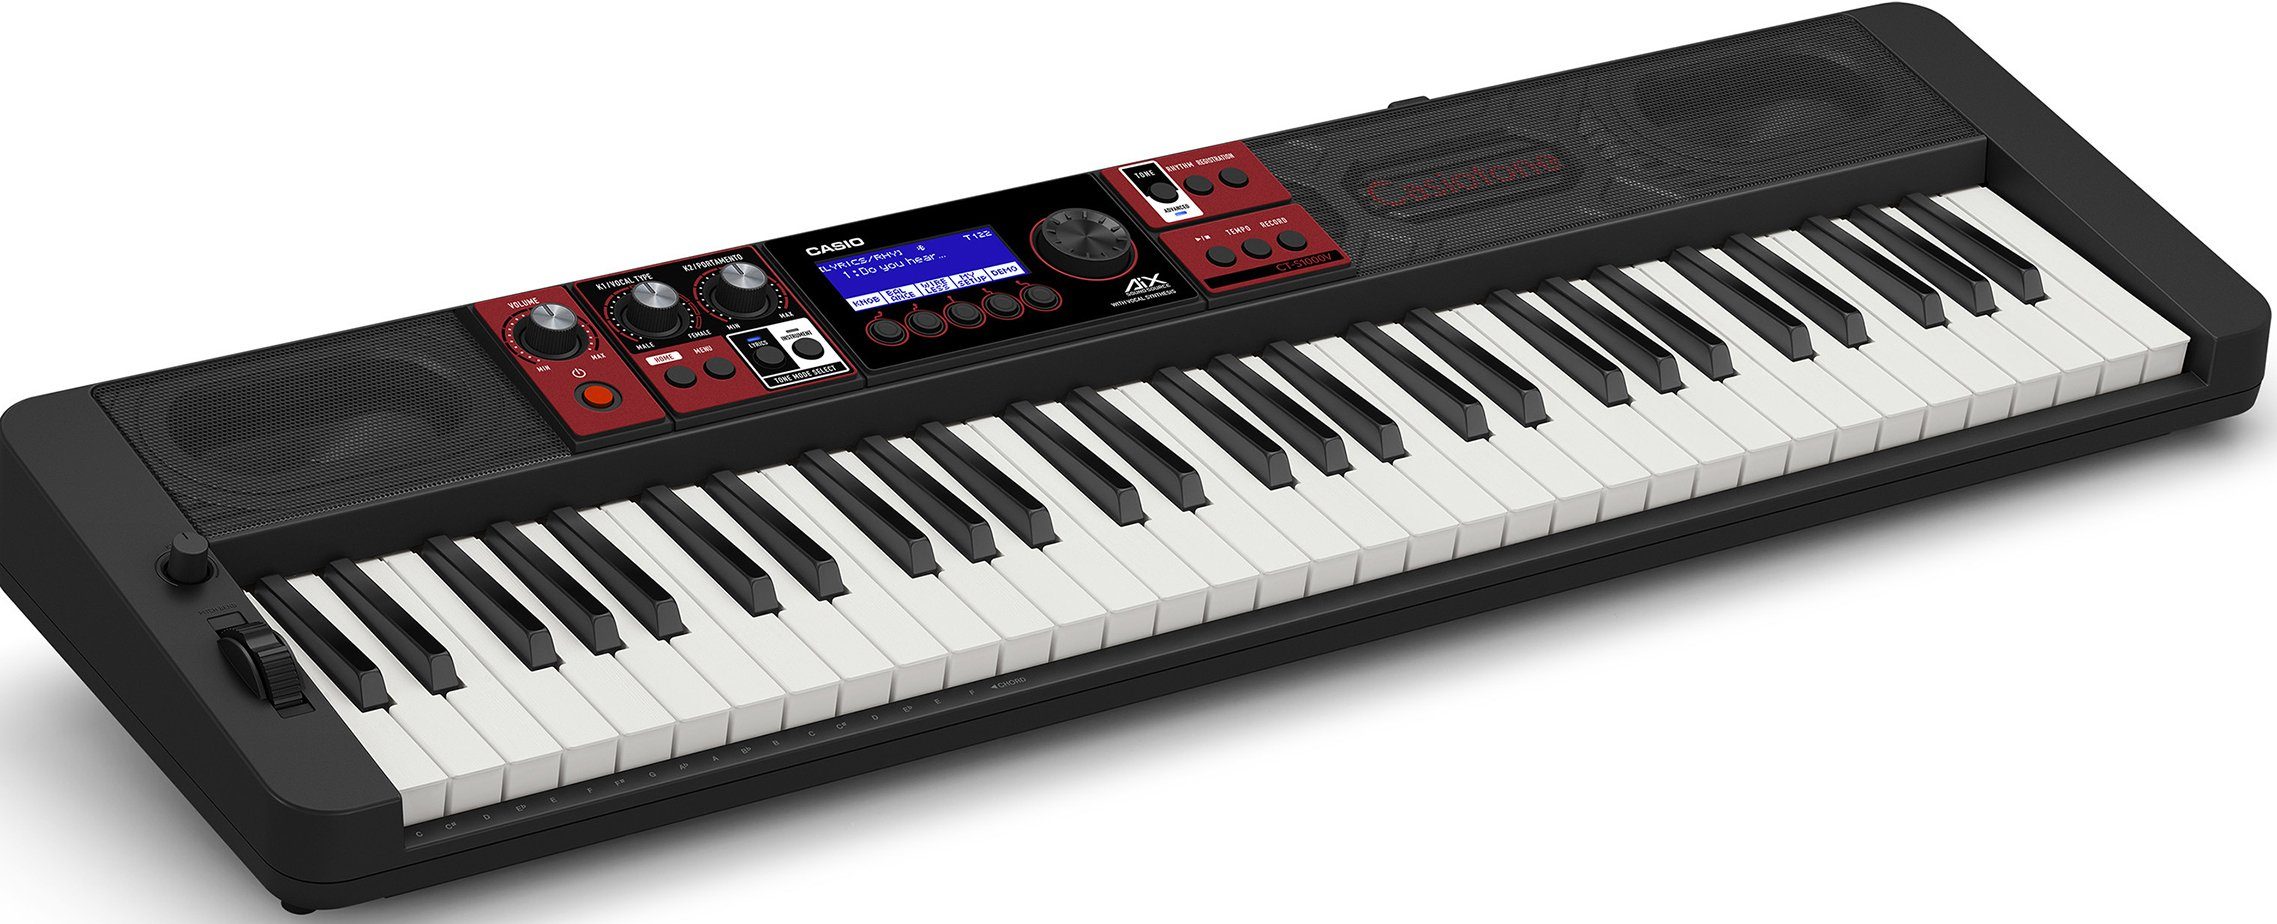 CT-S1000V, Home-Keyboard mit CASIO Bluetooth-Adapter